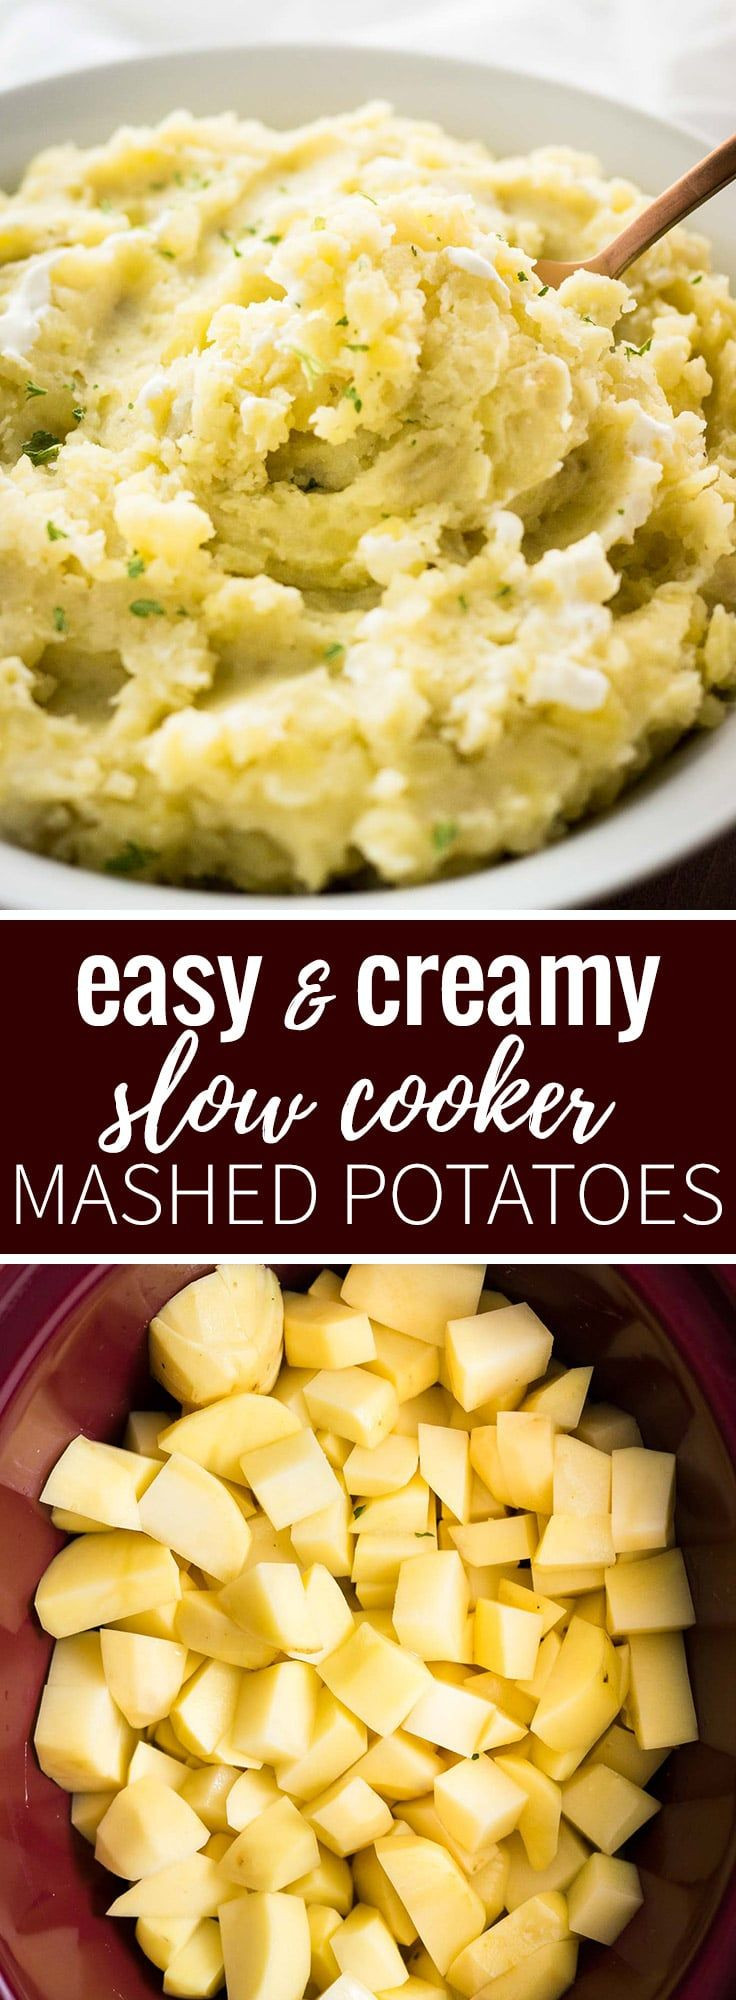 Mashed Potatoes In Crockpot Make Ahead
 This Creamy Crock Pot Mashed Potatoes Recipe is SO easy